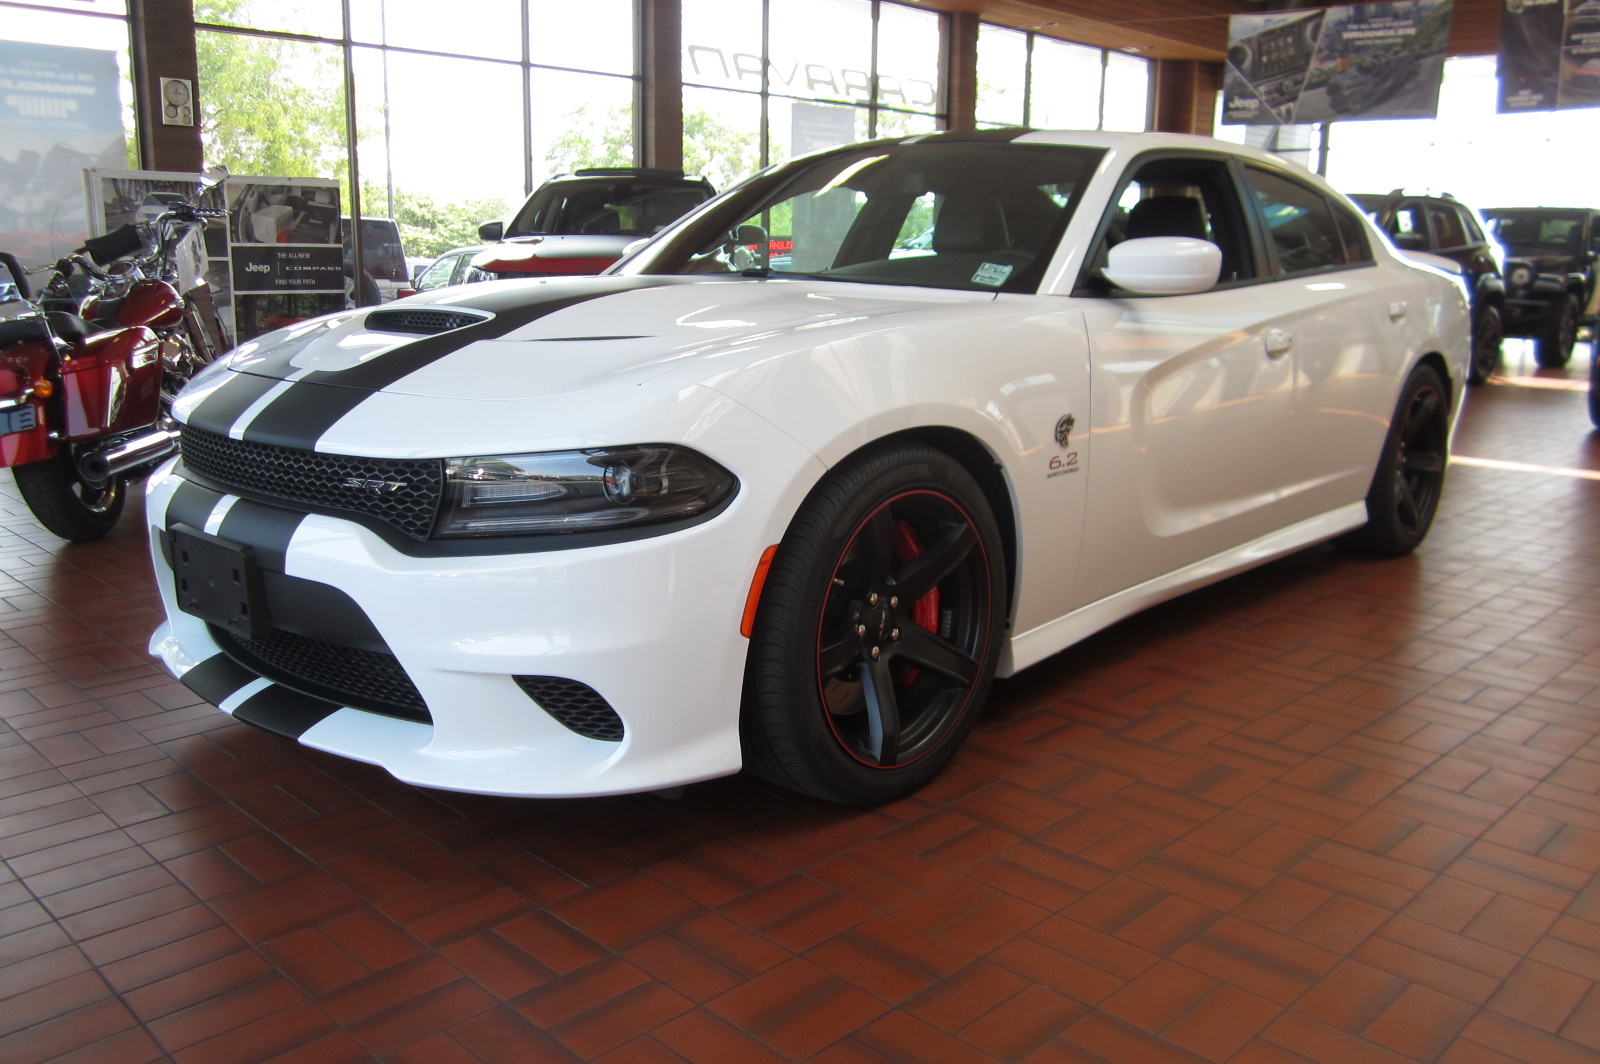  Dodge Charger HELLCAT